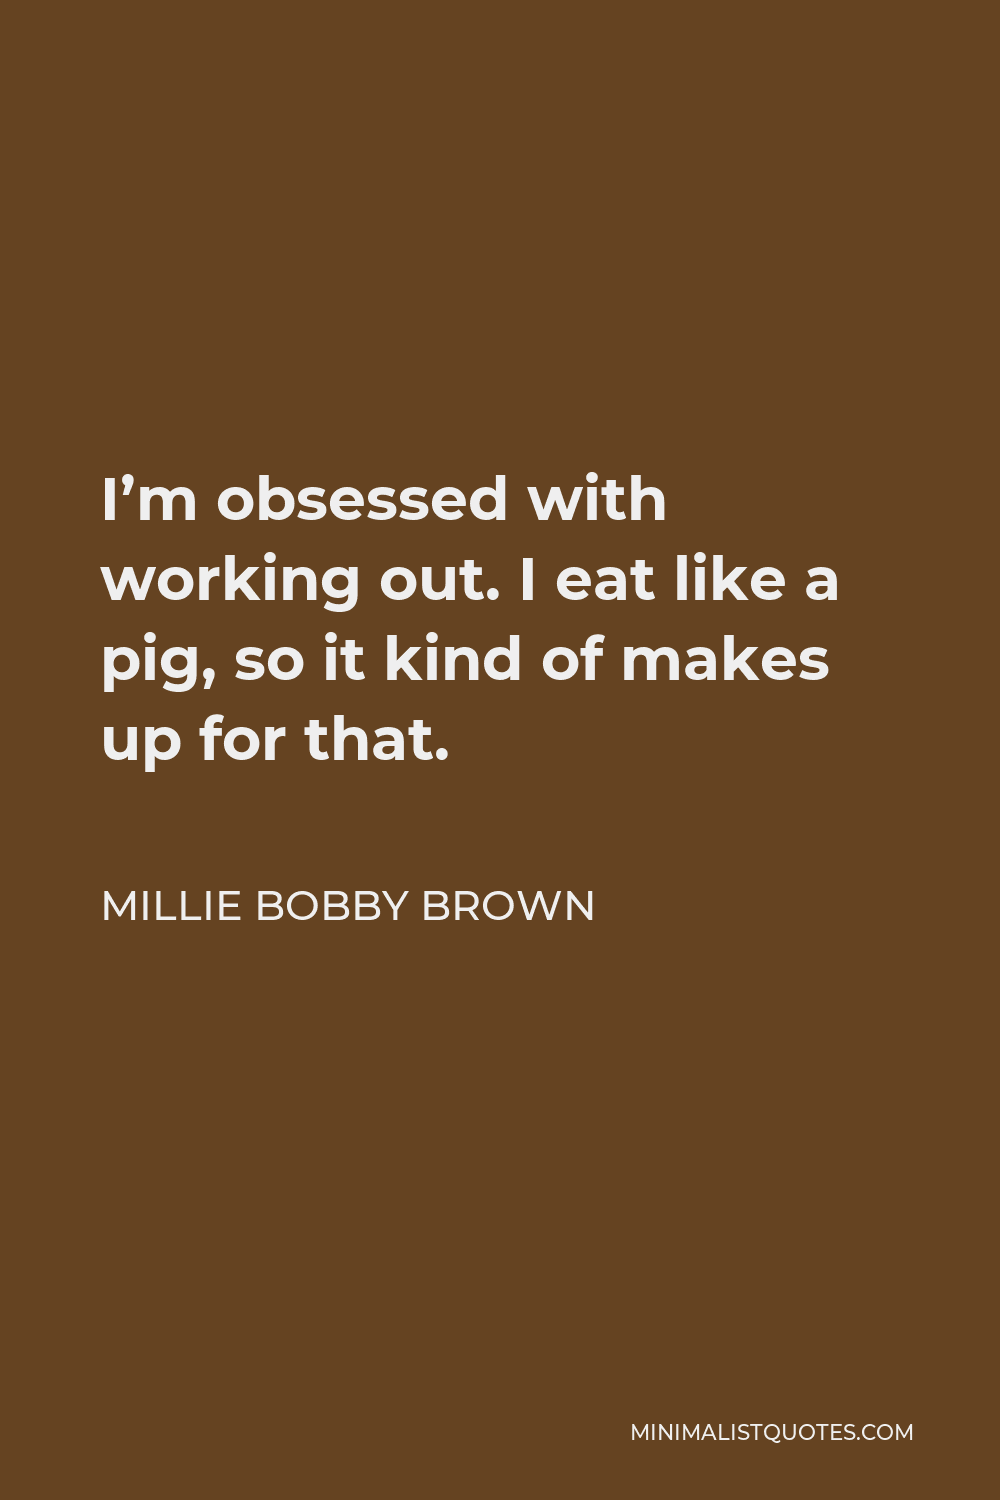 Millie Bobby Brown Quote - I’m obsessed with working out. I eat like a pig, so it kind of makes up for that.